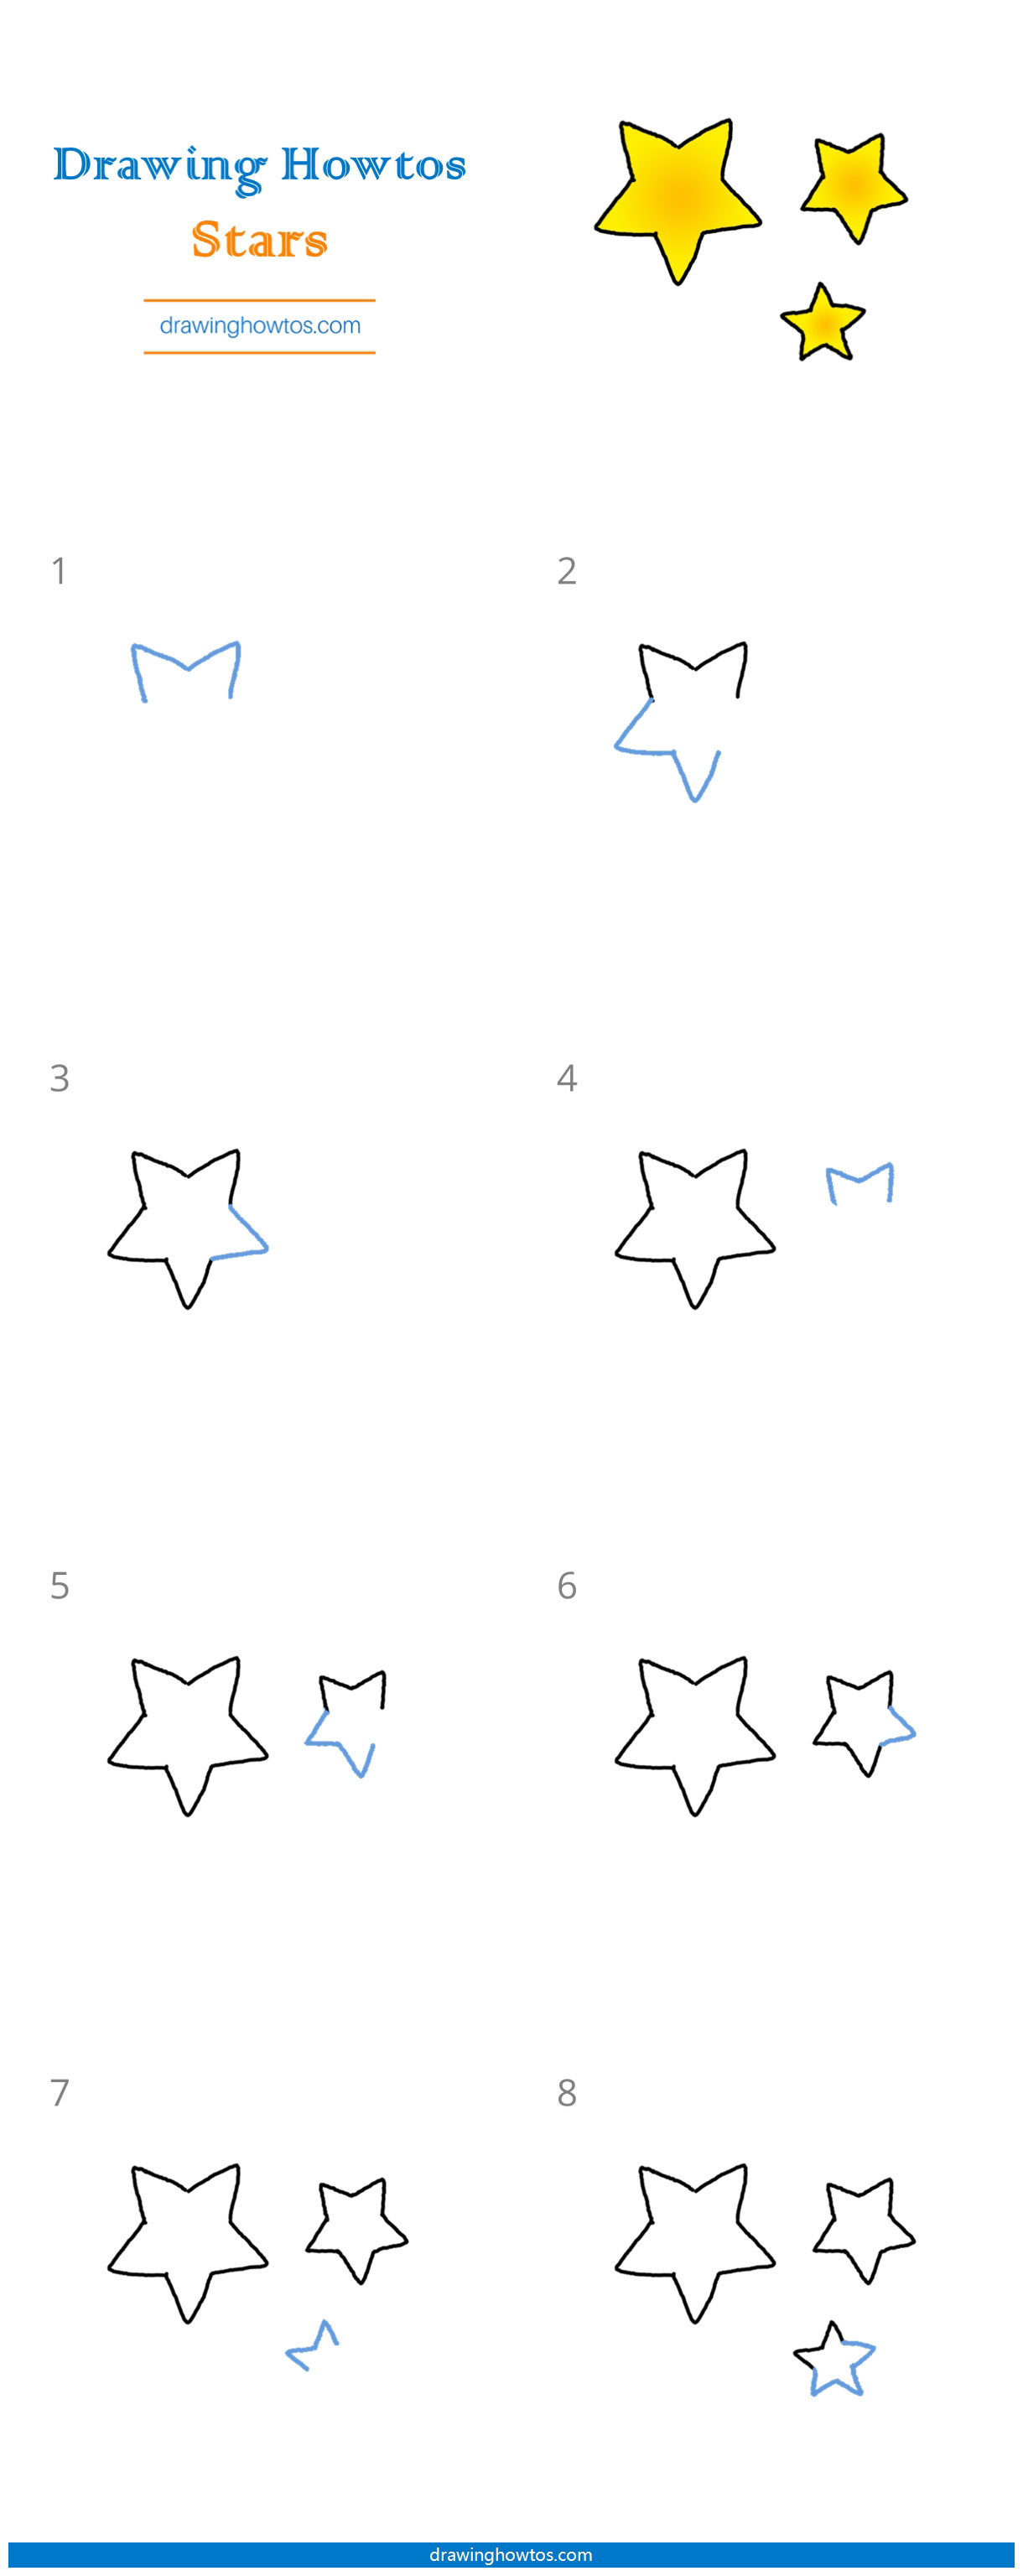 How to Draw a Star - Step by Step Easy Drawing Guides - Drawing Howtos